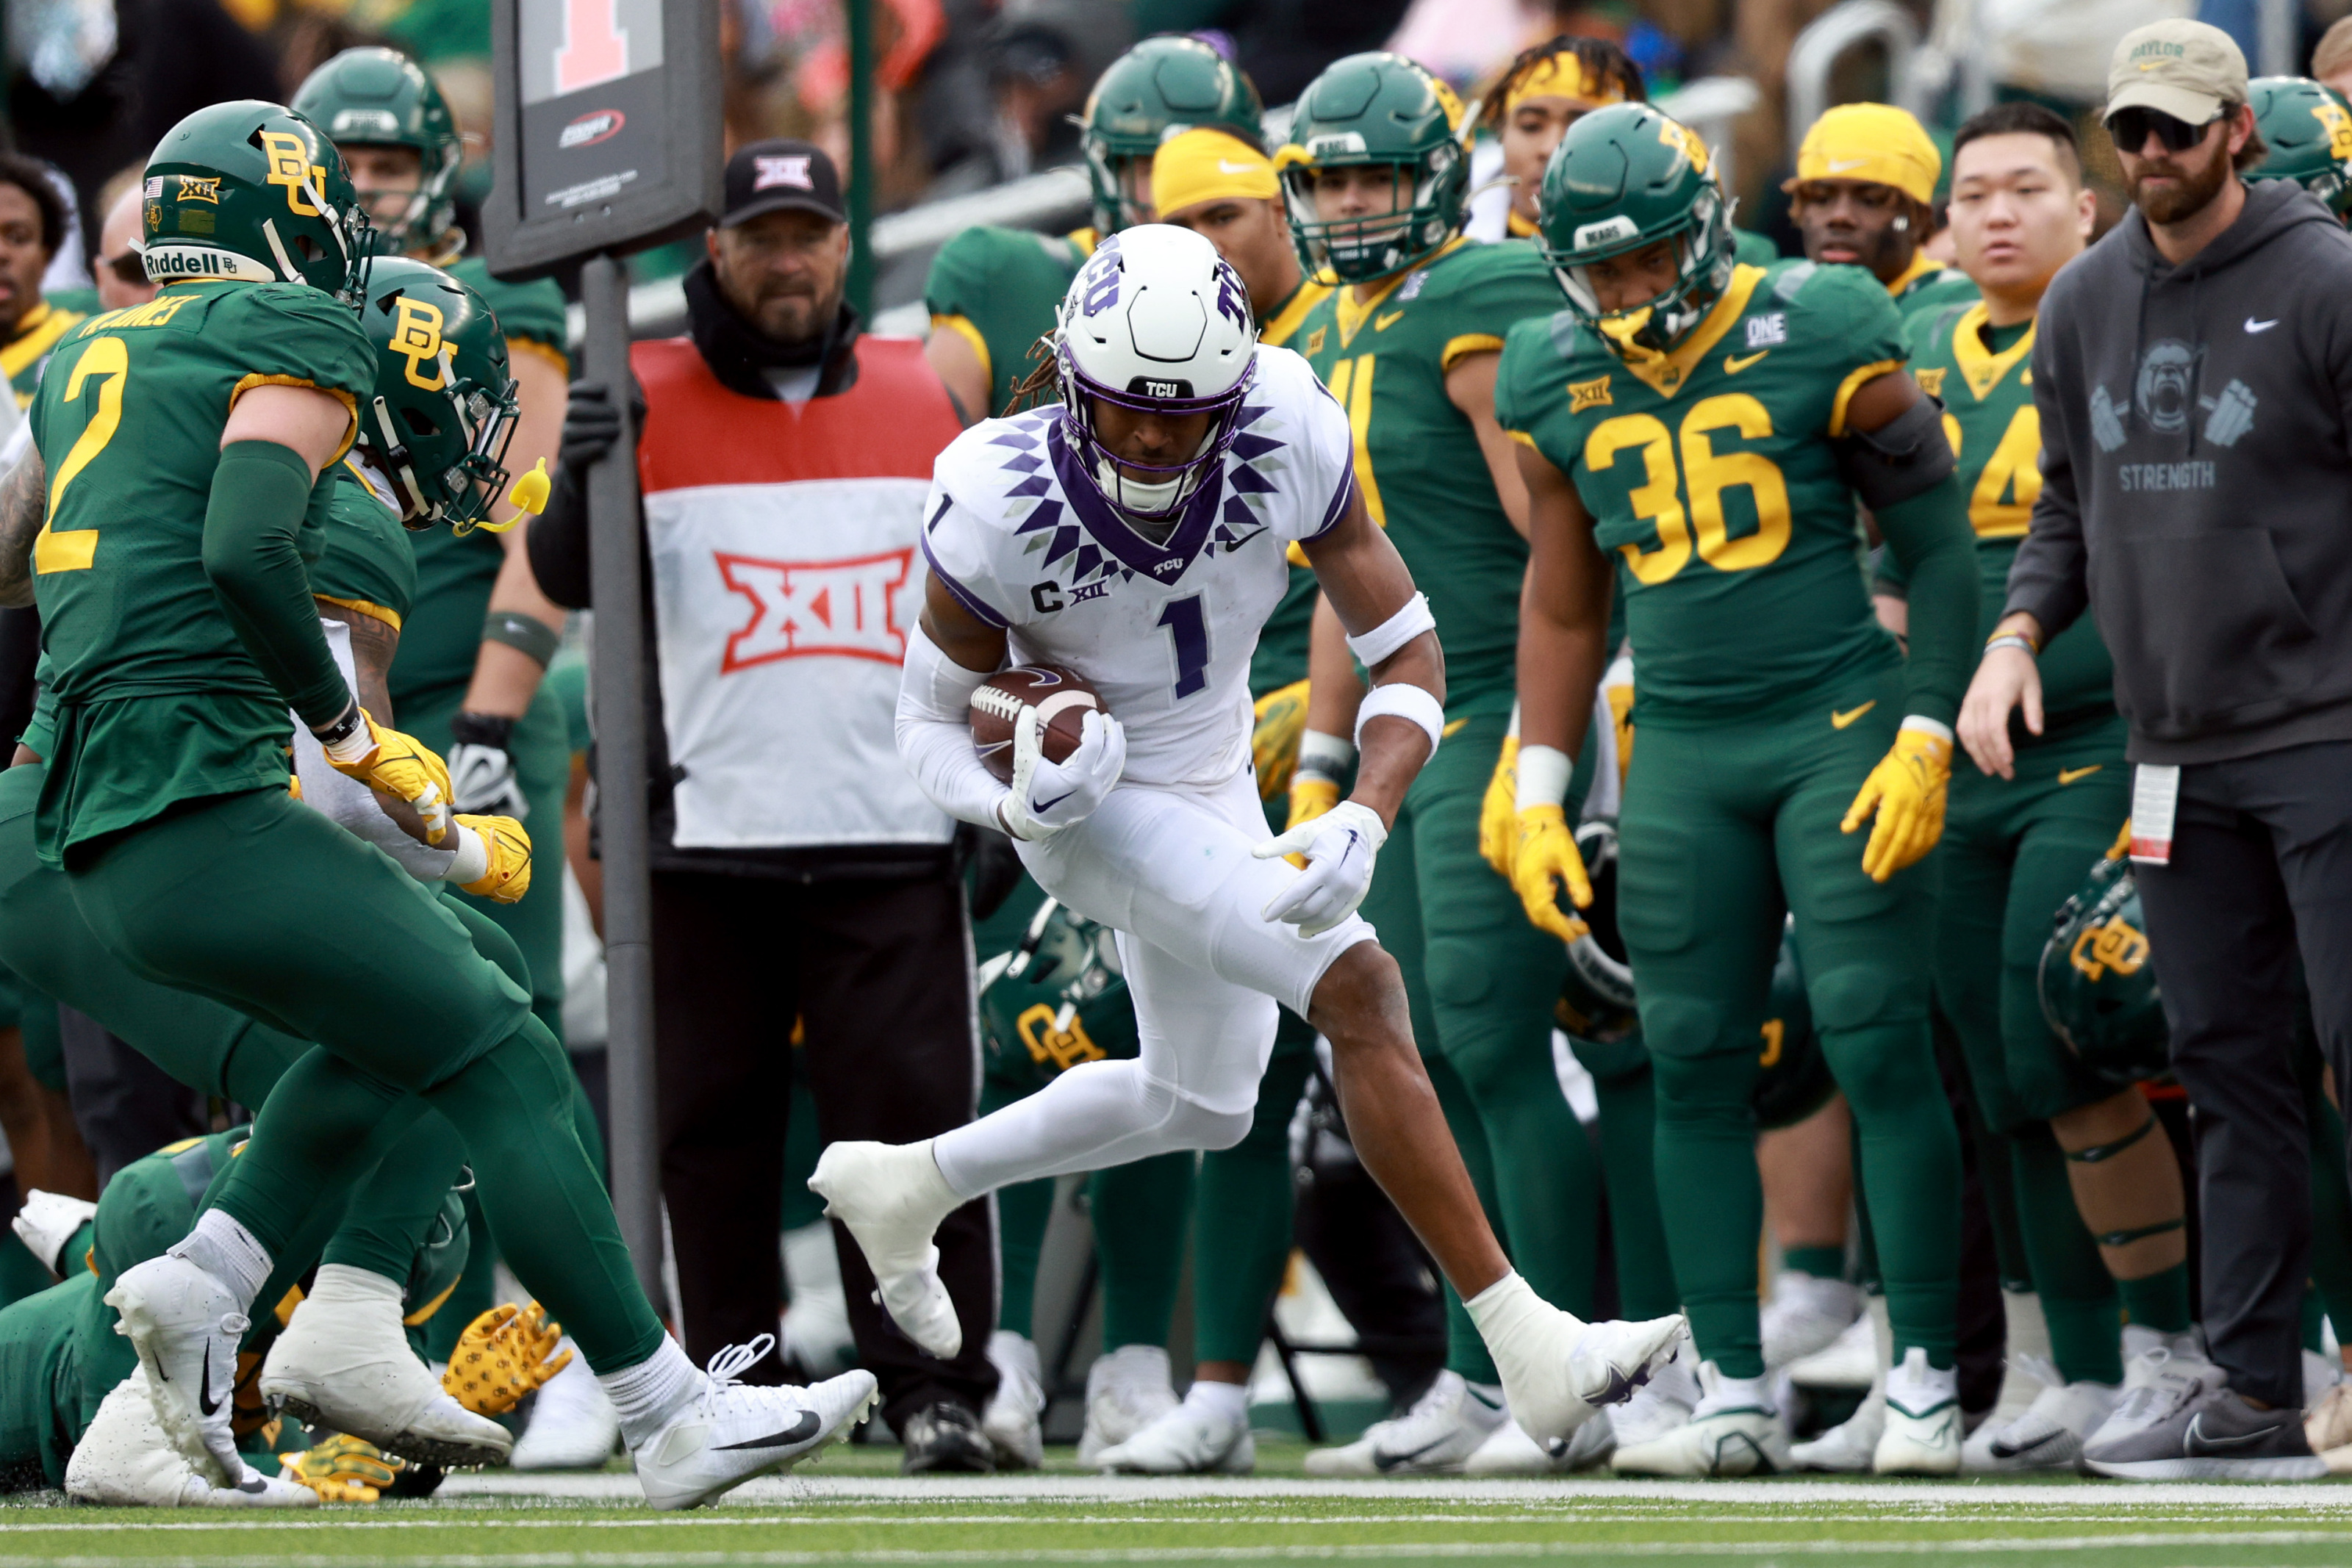 TCU receiver Quentin Johnston leads 8 Horned Frogs in the 2023 NFL Draft